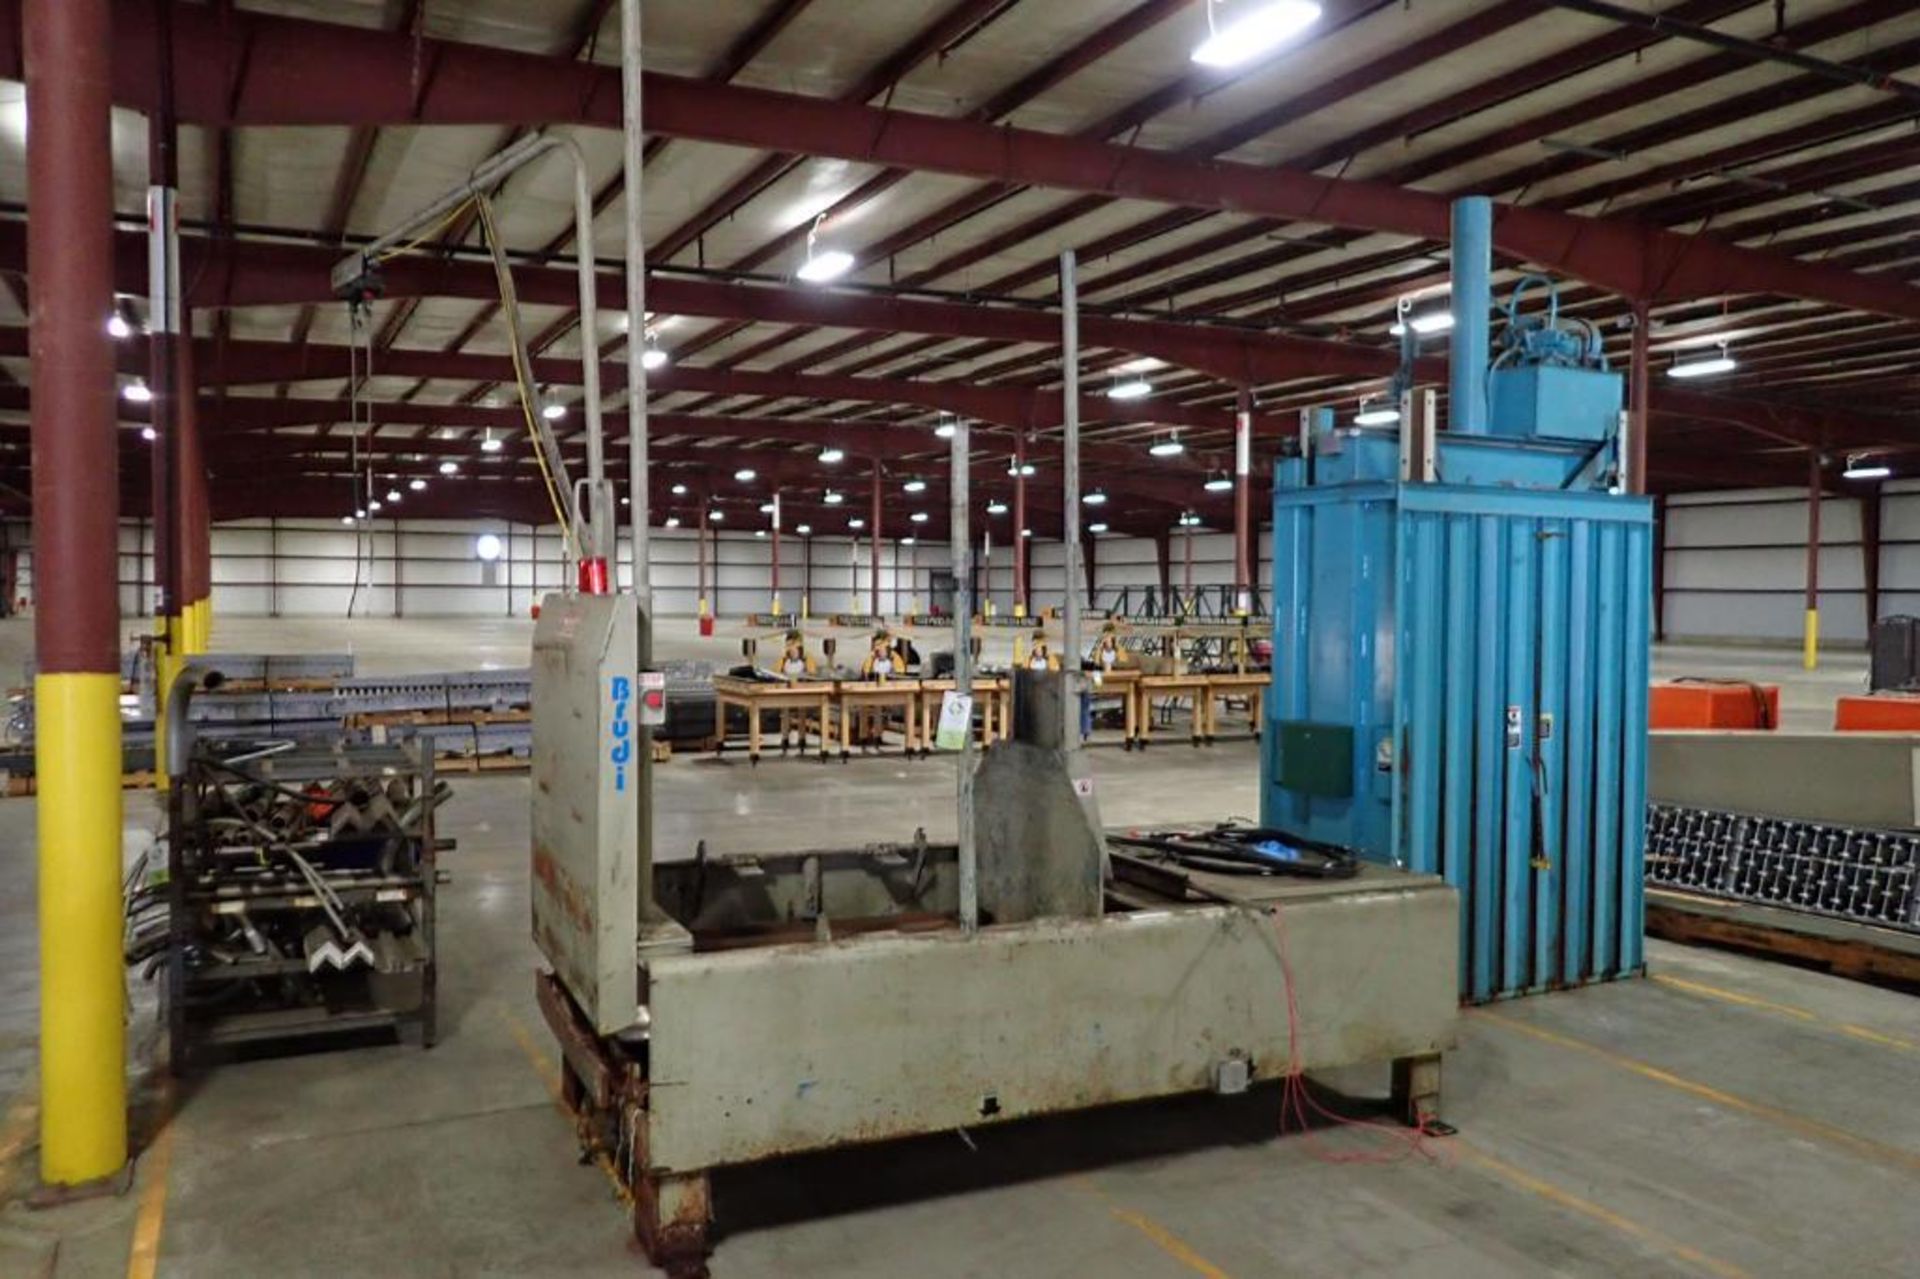 Brudi load transfer station {Located in Plymouth, IN}